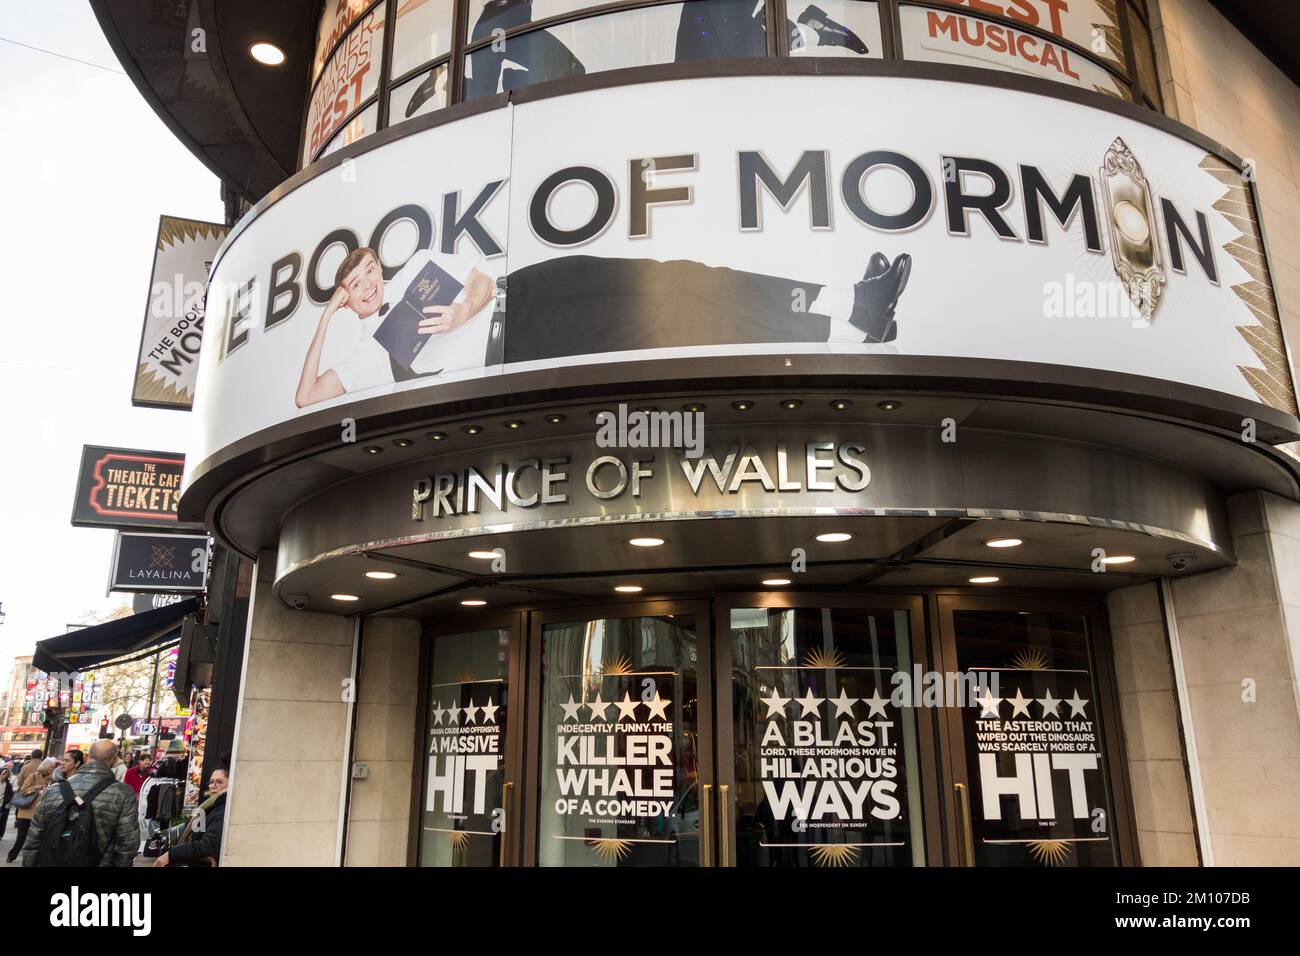 The Book Of Mormon at The Prince of Wales Theatre, London, England, UK Stock Photo